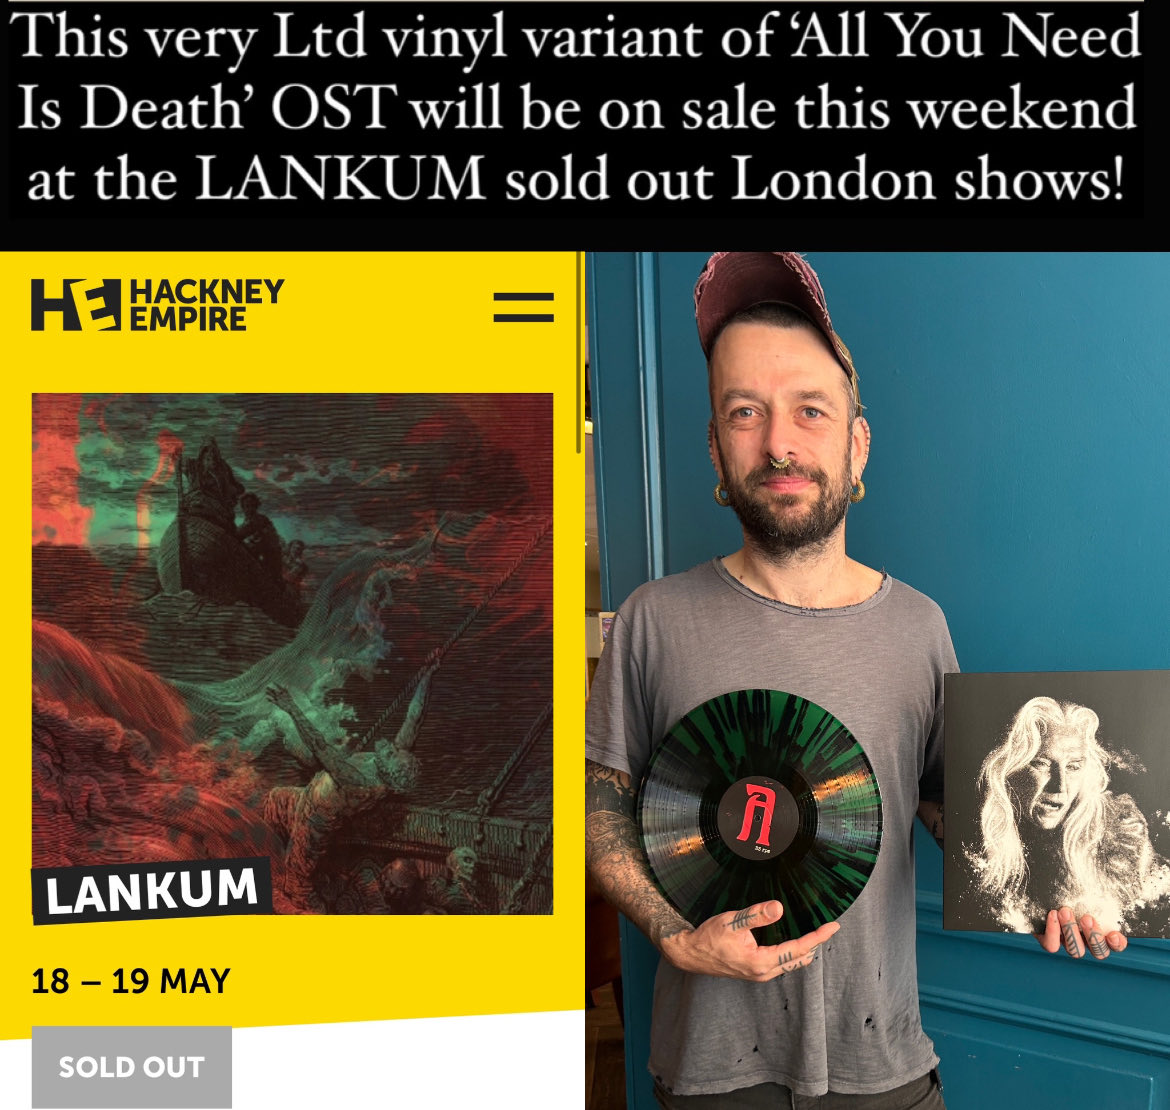 If you’re lucky enough to have a ticket for the upcoming ⁦@LankumDublin⁩ sold out shows this weekend at @hackneyempire ; HEAD STRAIGHT to the merch table and pick up this extremely limited pressing of Ian Lynch’s “All You Need Is Death” score ! ⁦@oneleg_oneeye⁩